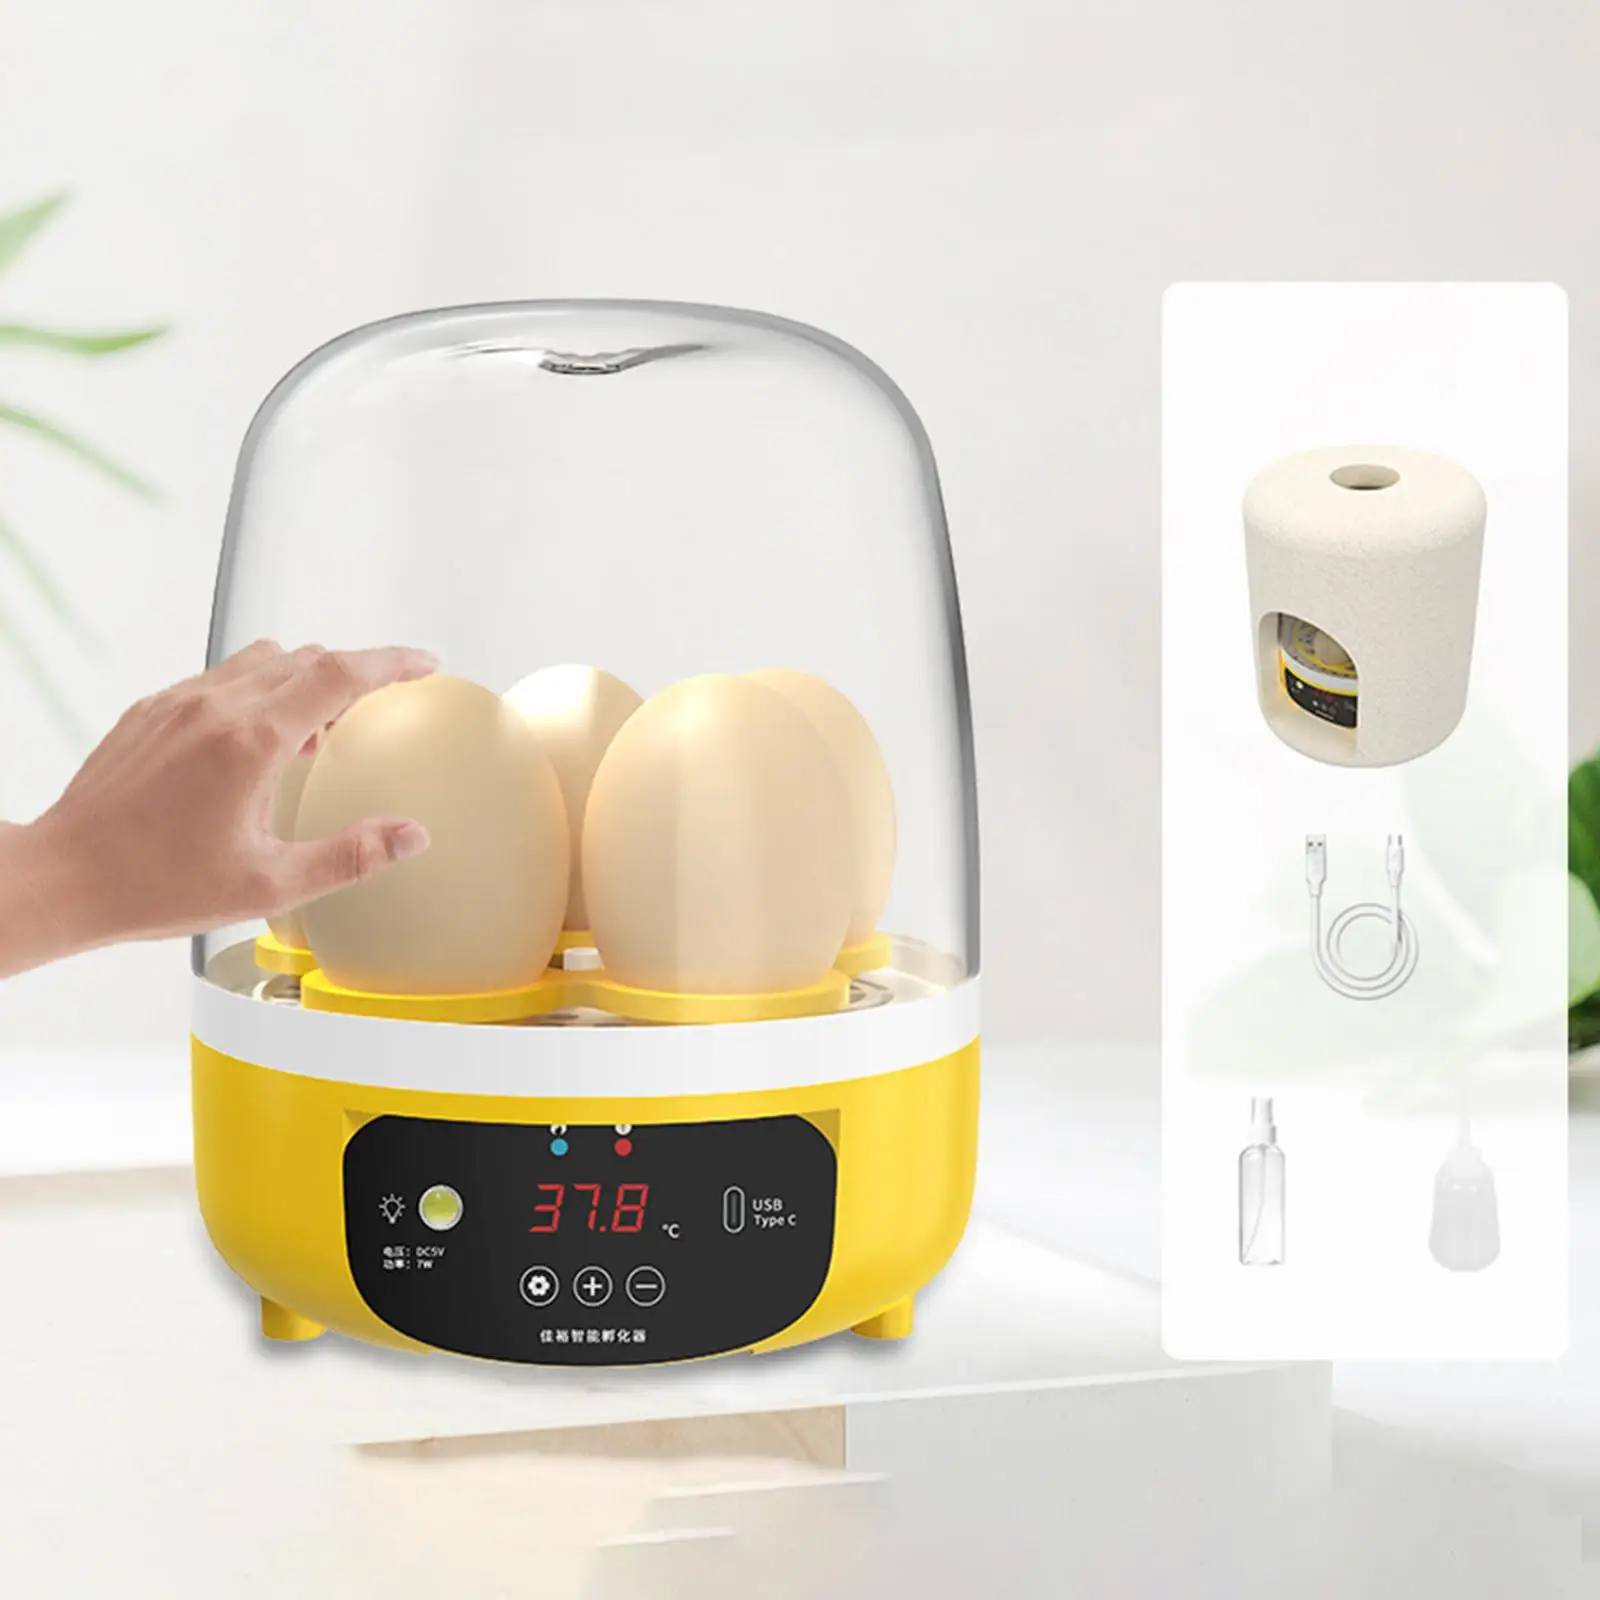 Portable Poultry Hatcher 5 Eggs Digital Automatic Egg Incubator for Hatching